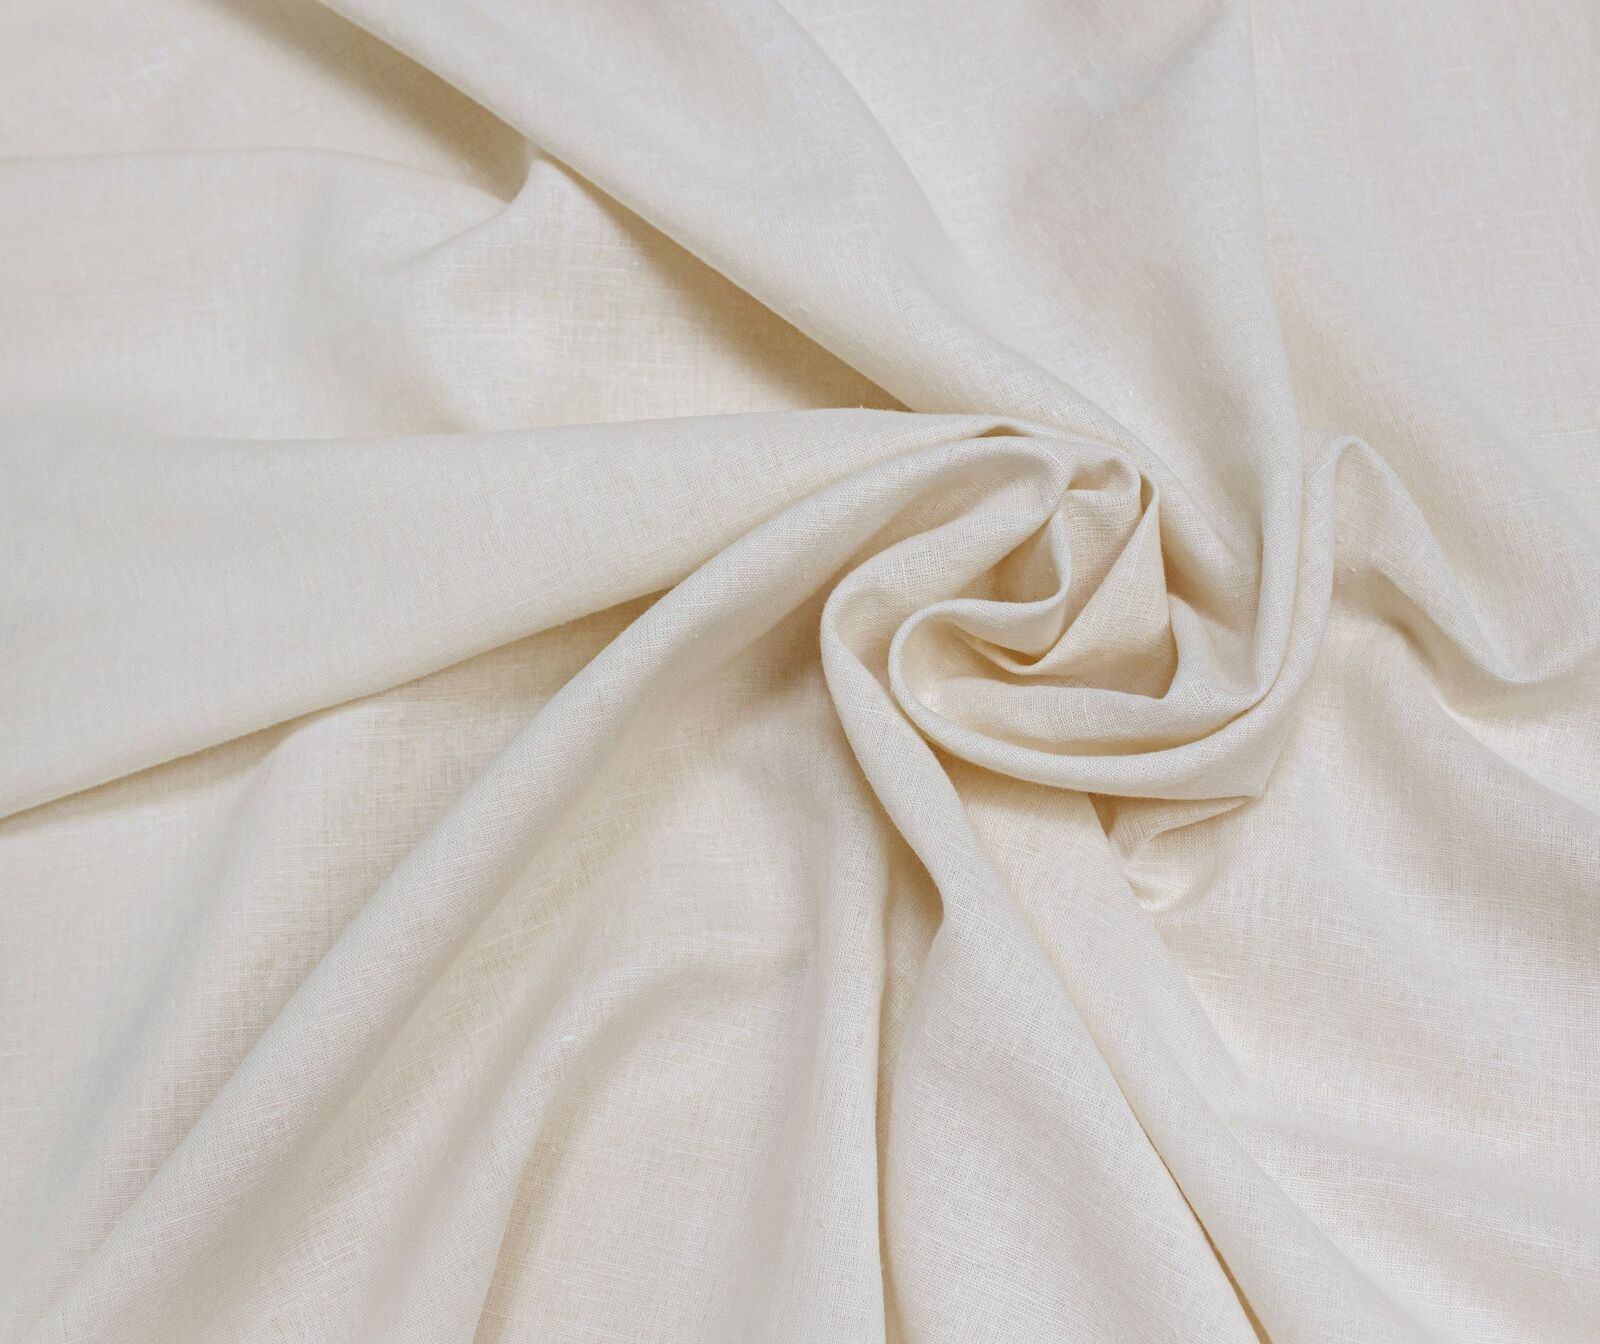 Natural Pure Linen Fabric Wrinkled Material, Plain Linen Look Upholstery Fabric